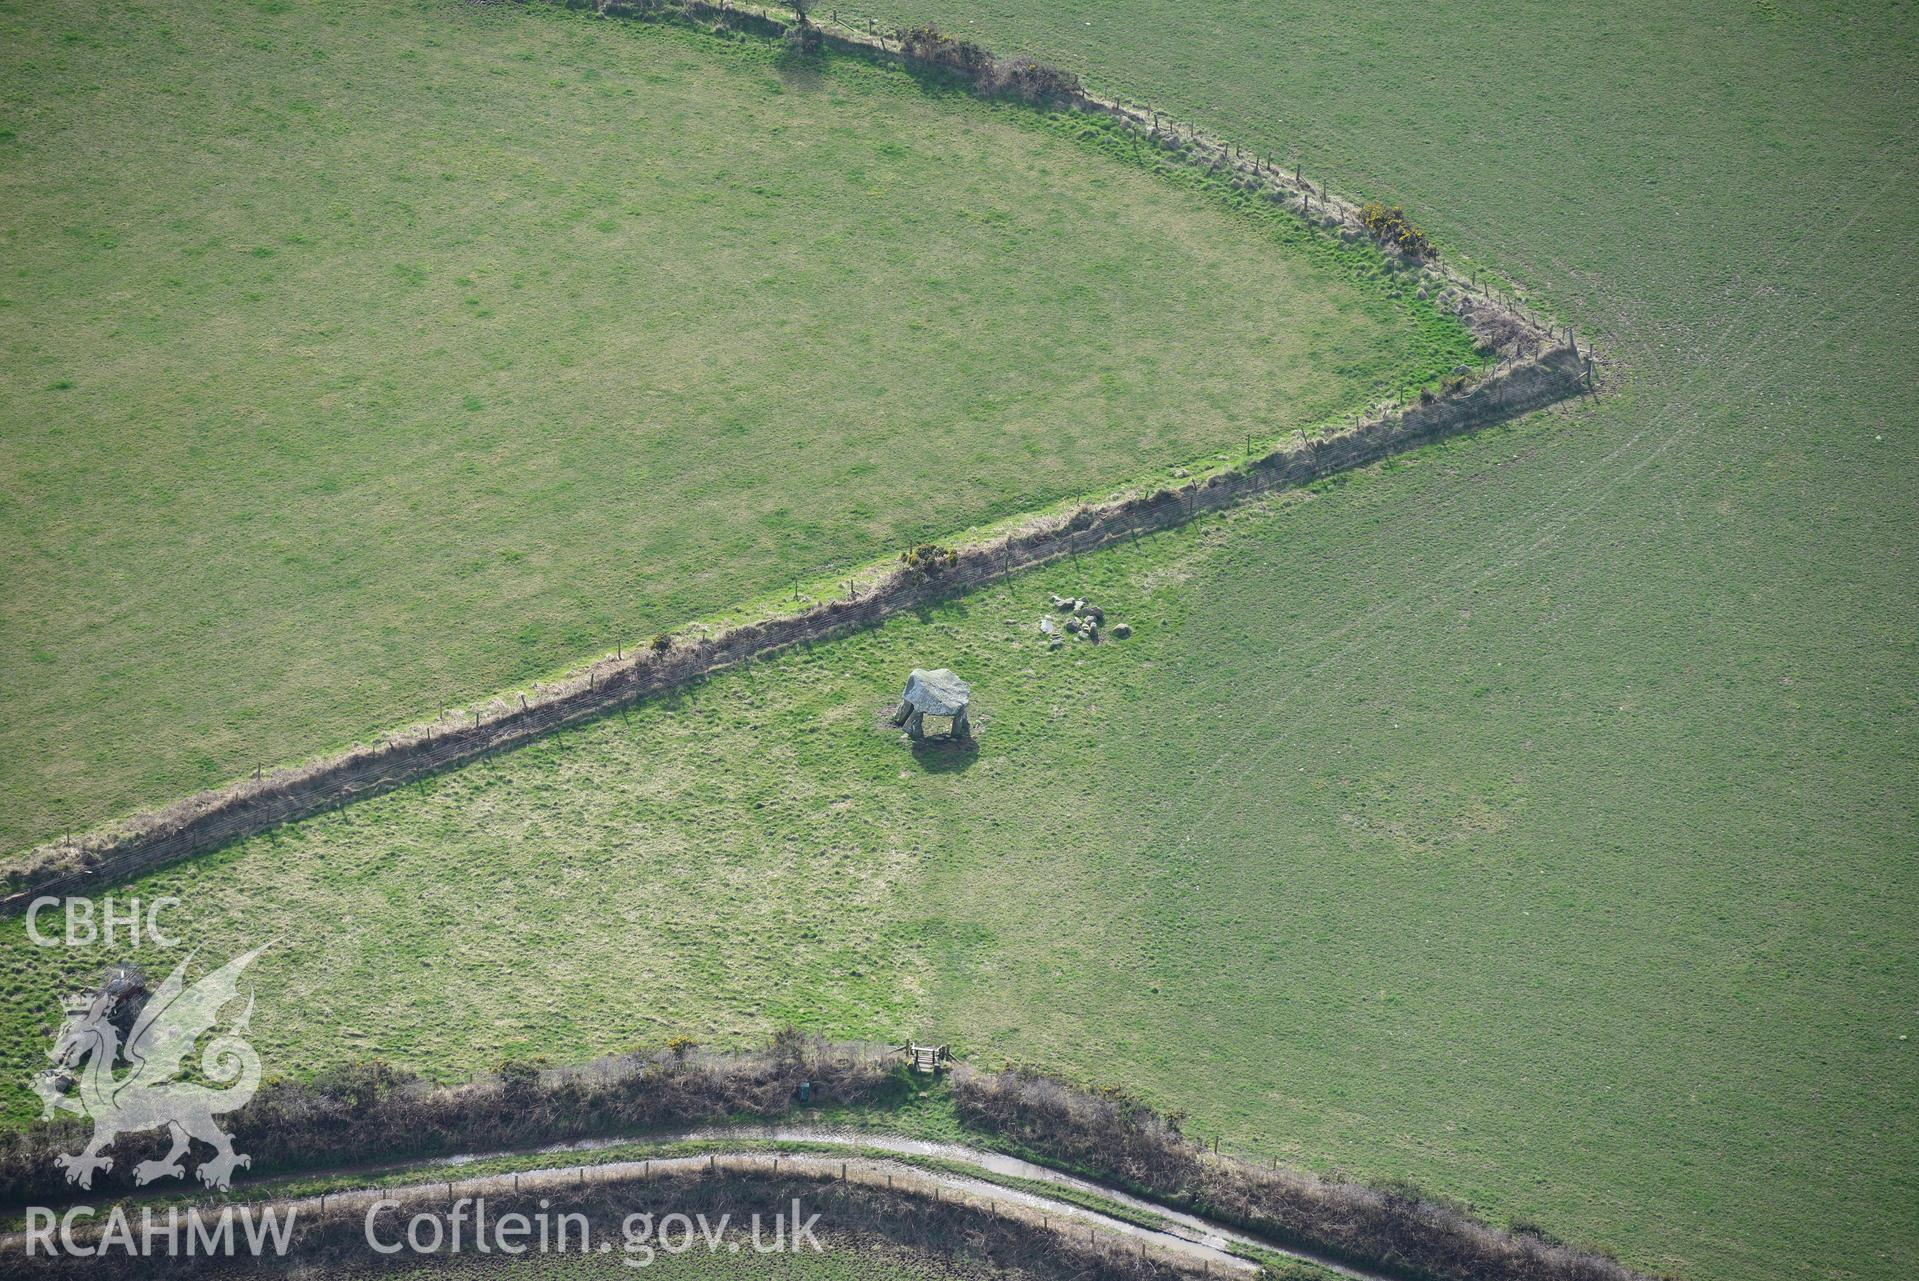 Llech-y-Drybedd chambered tomb, near Moylgrove, Cardigan. Oblique aerial photograph taken during the Royal Commission's programme of archaeological aerial reconnaissance by Toby Driver on 13th March 2015.